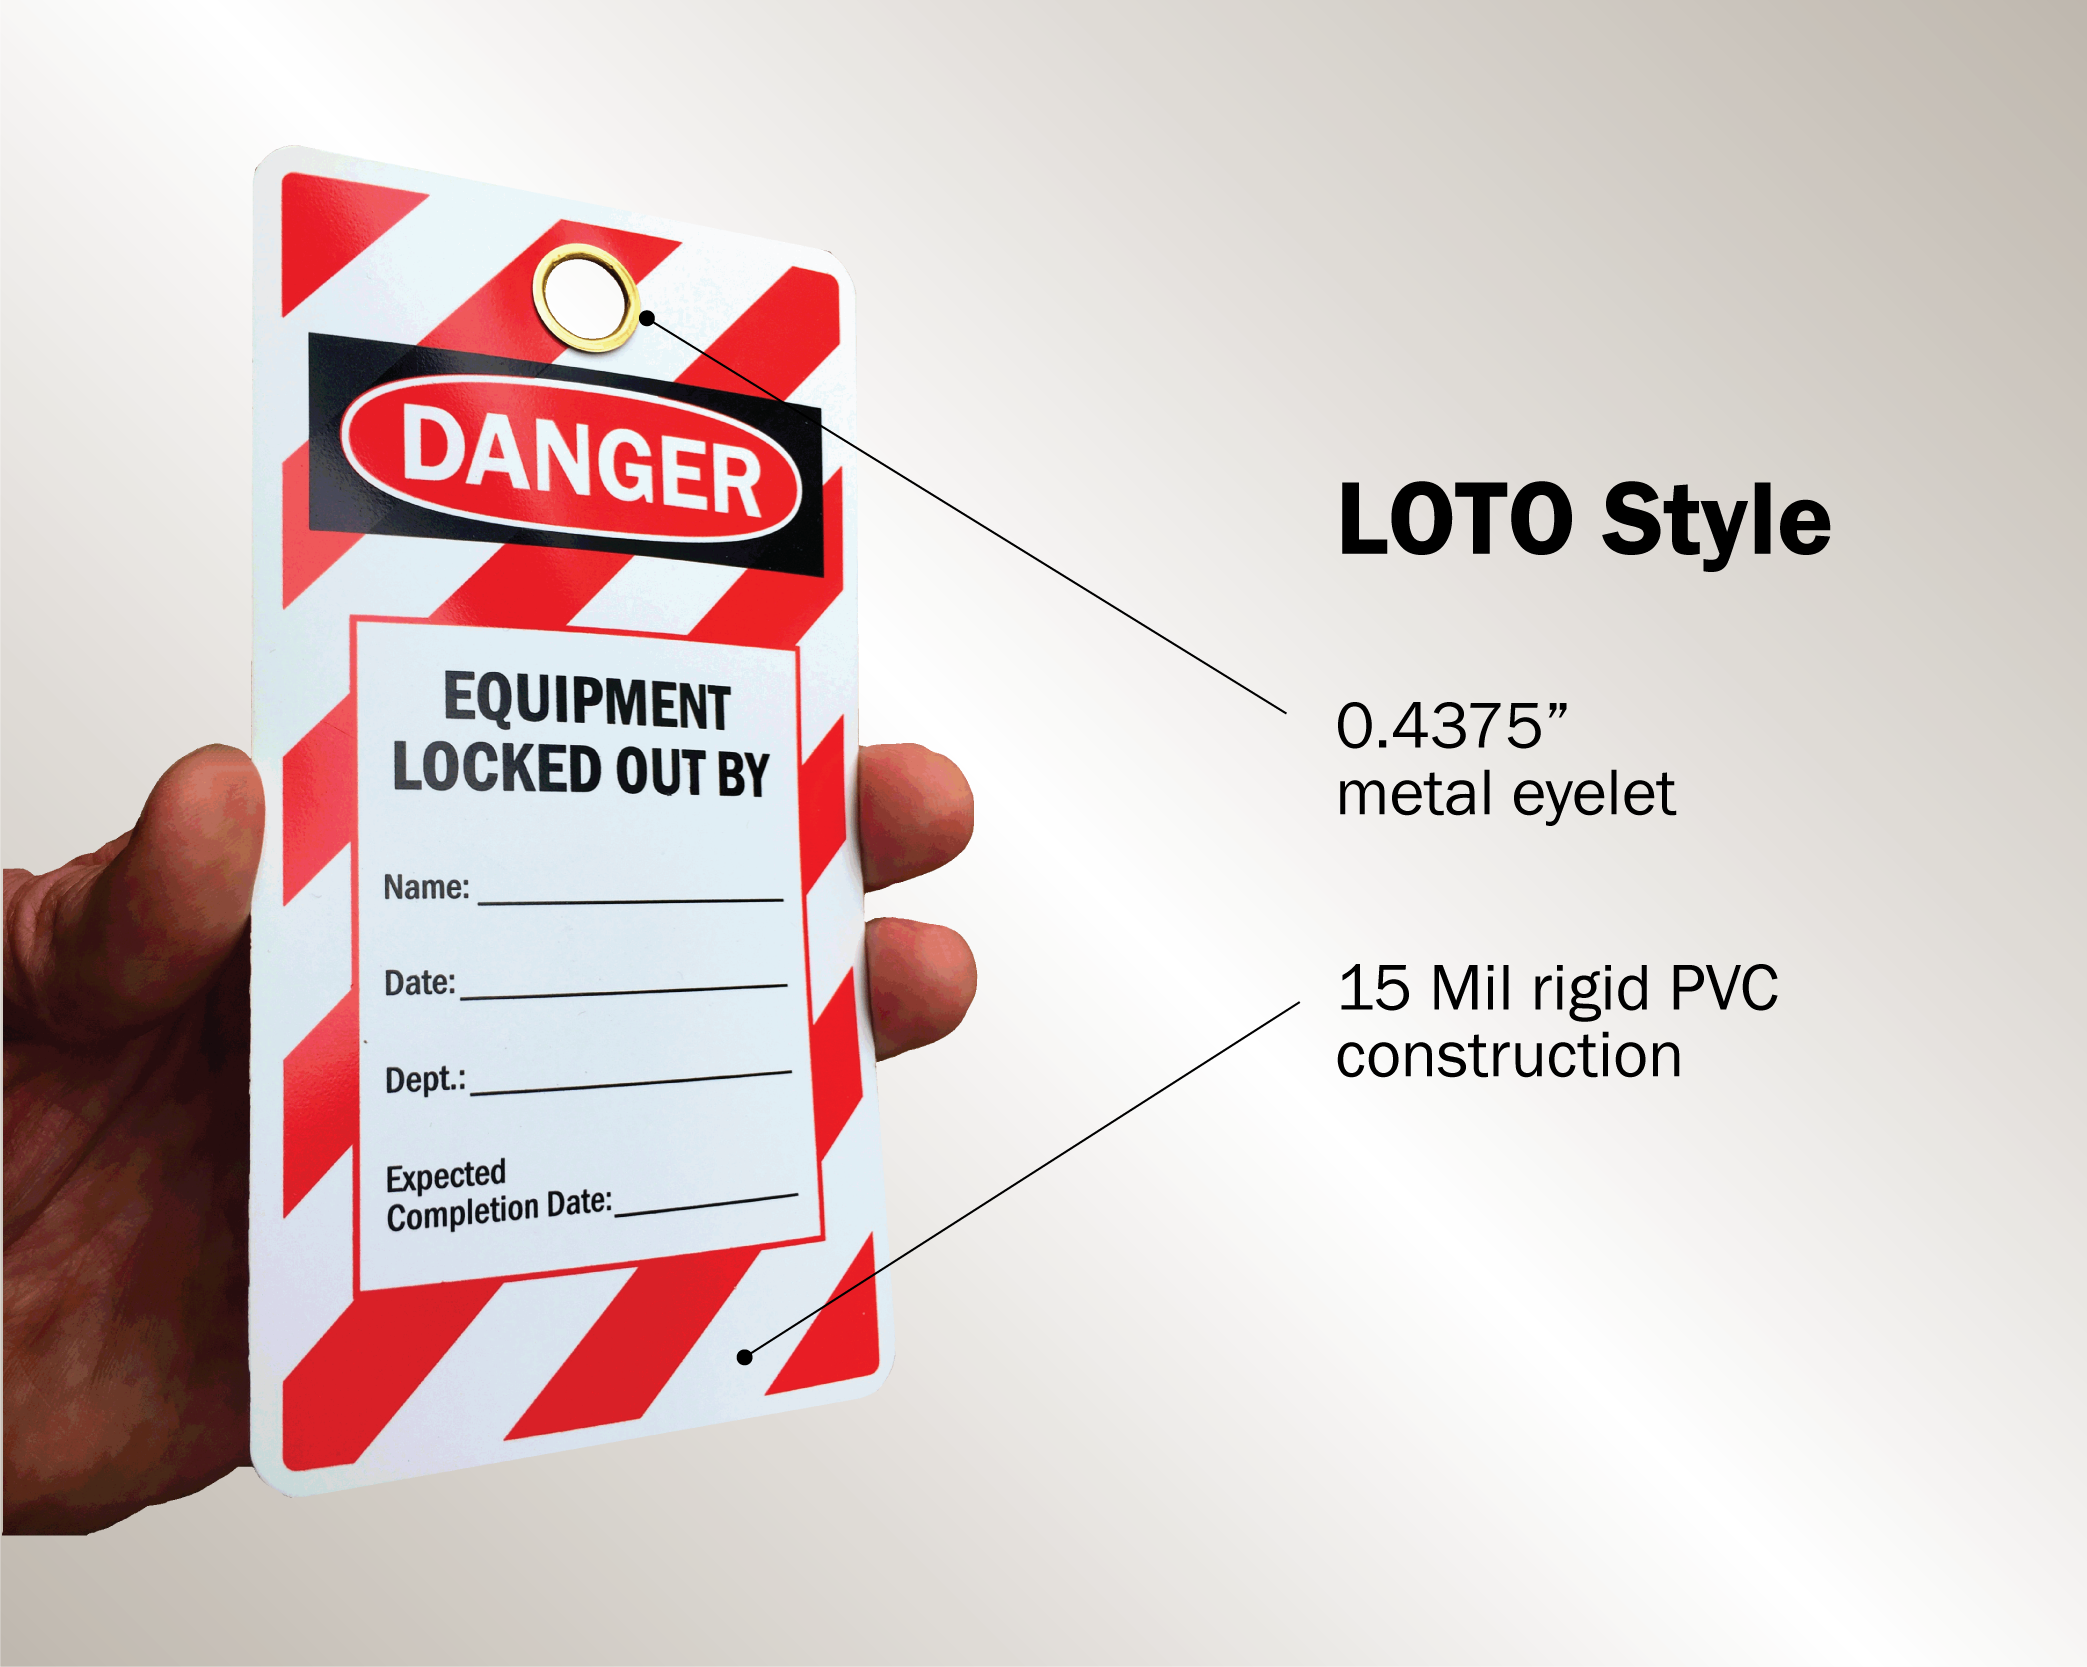 An image of an OSHA style lockout tagout tag reading, "Danger, equipment locked out" in black on a red and white striped background with a metal eyelet and rounded corners.